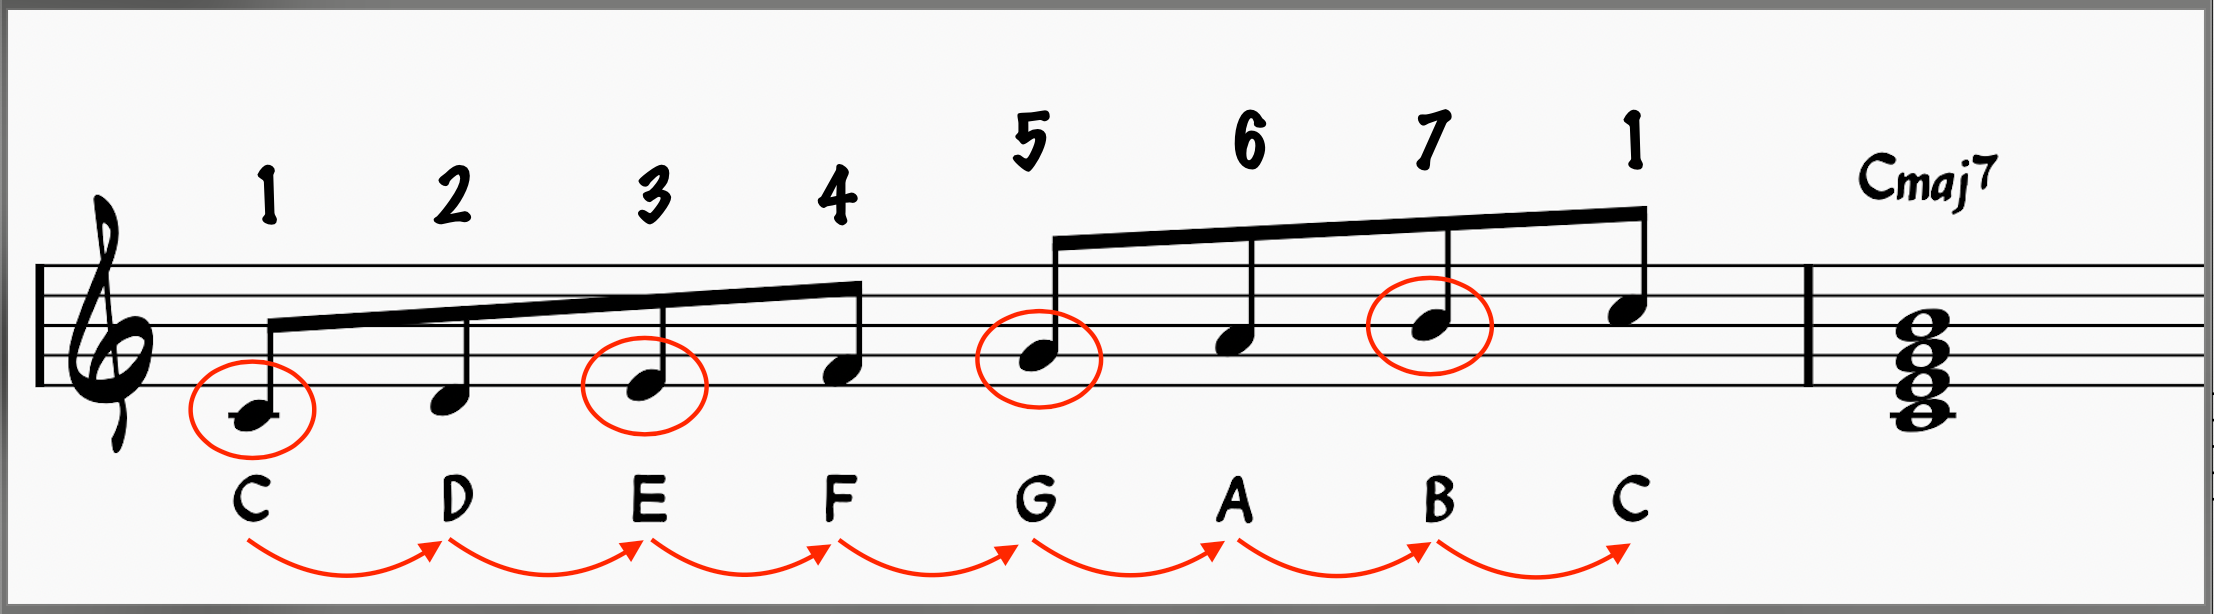 Tertiary Harmony: Isolating the root, 3rd, 5th, and 7th from a C major scale to build a Cmaj7 chord